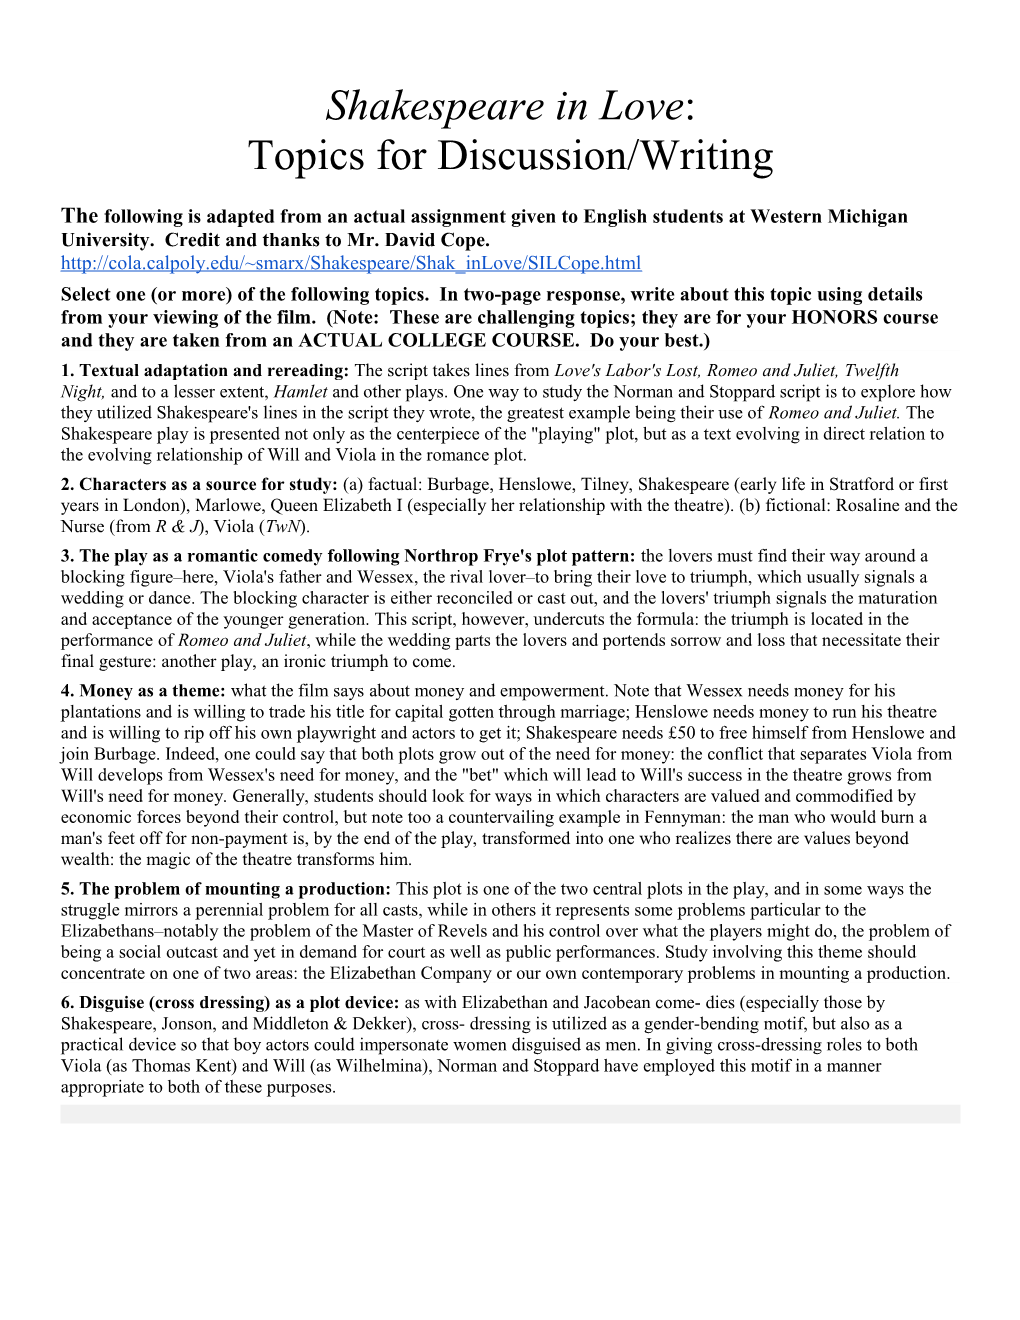 Topics for Discussion/Writing